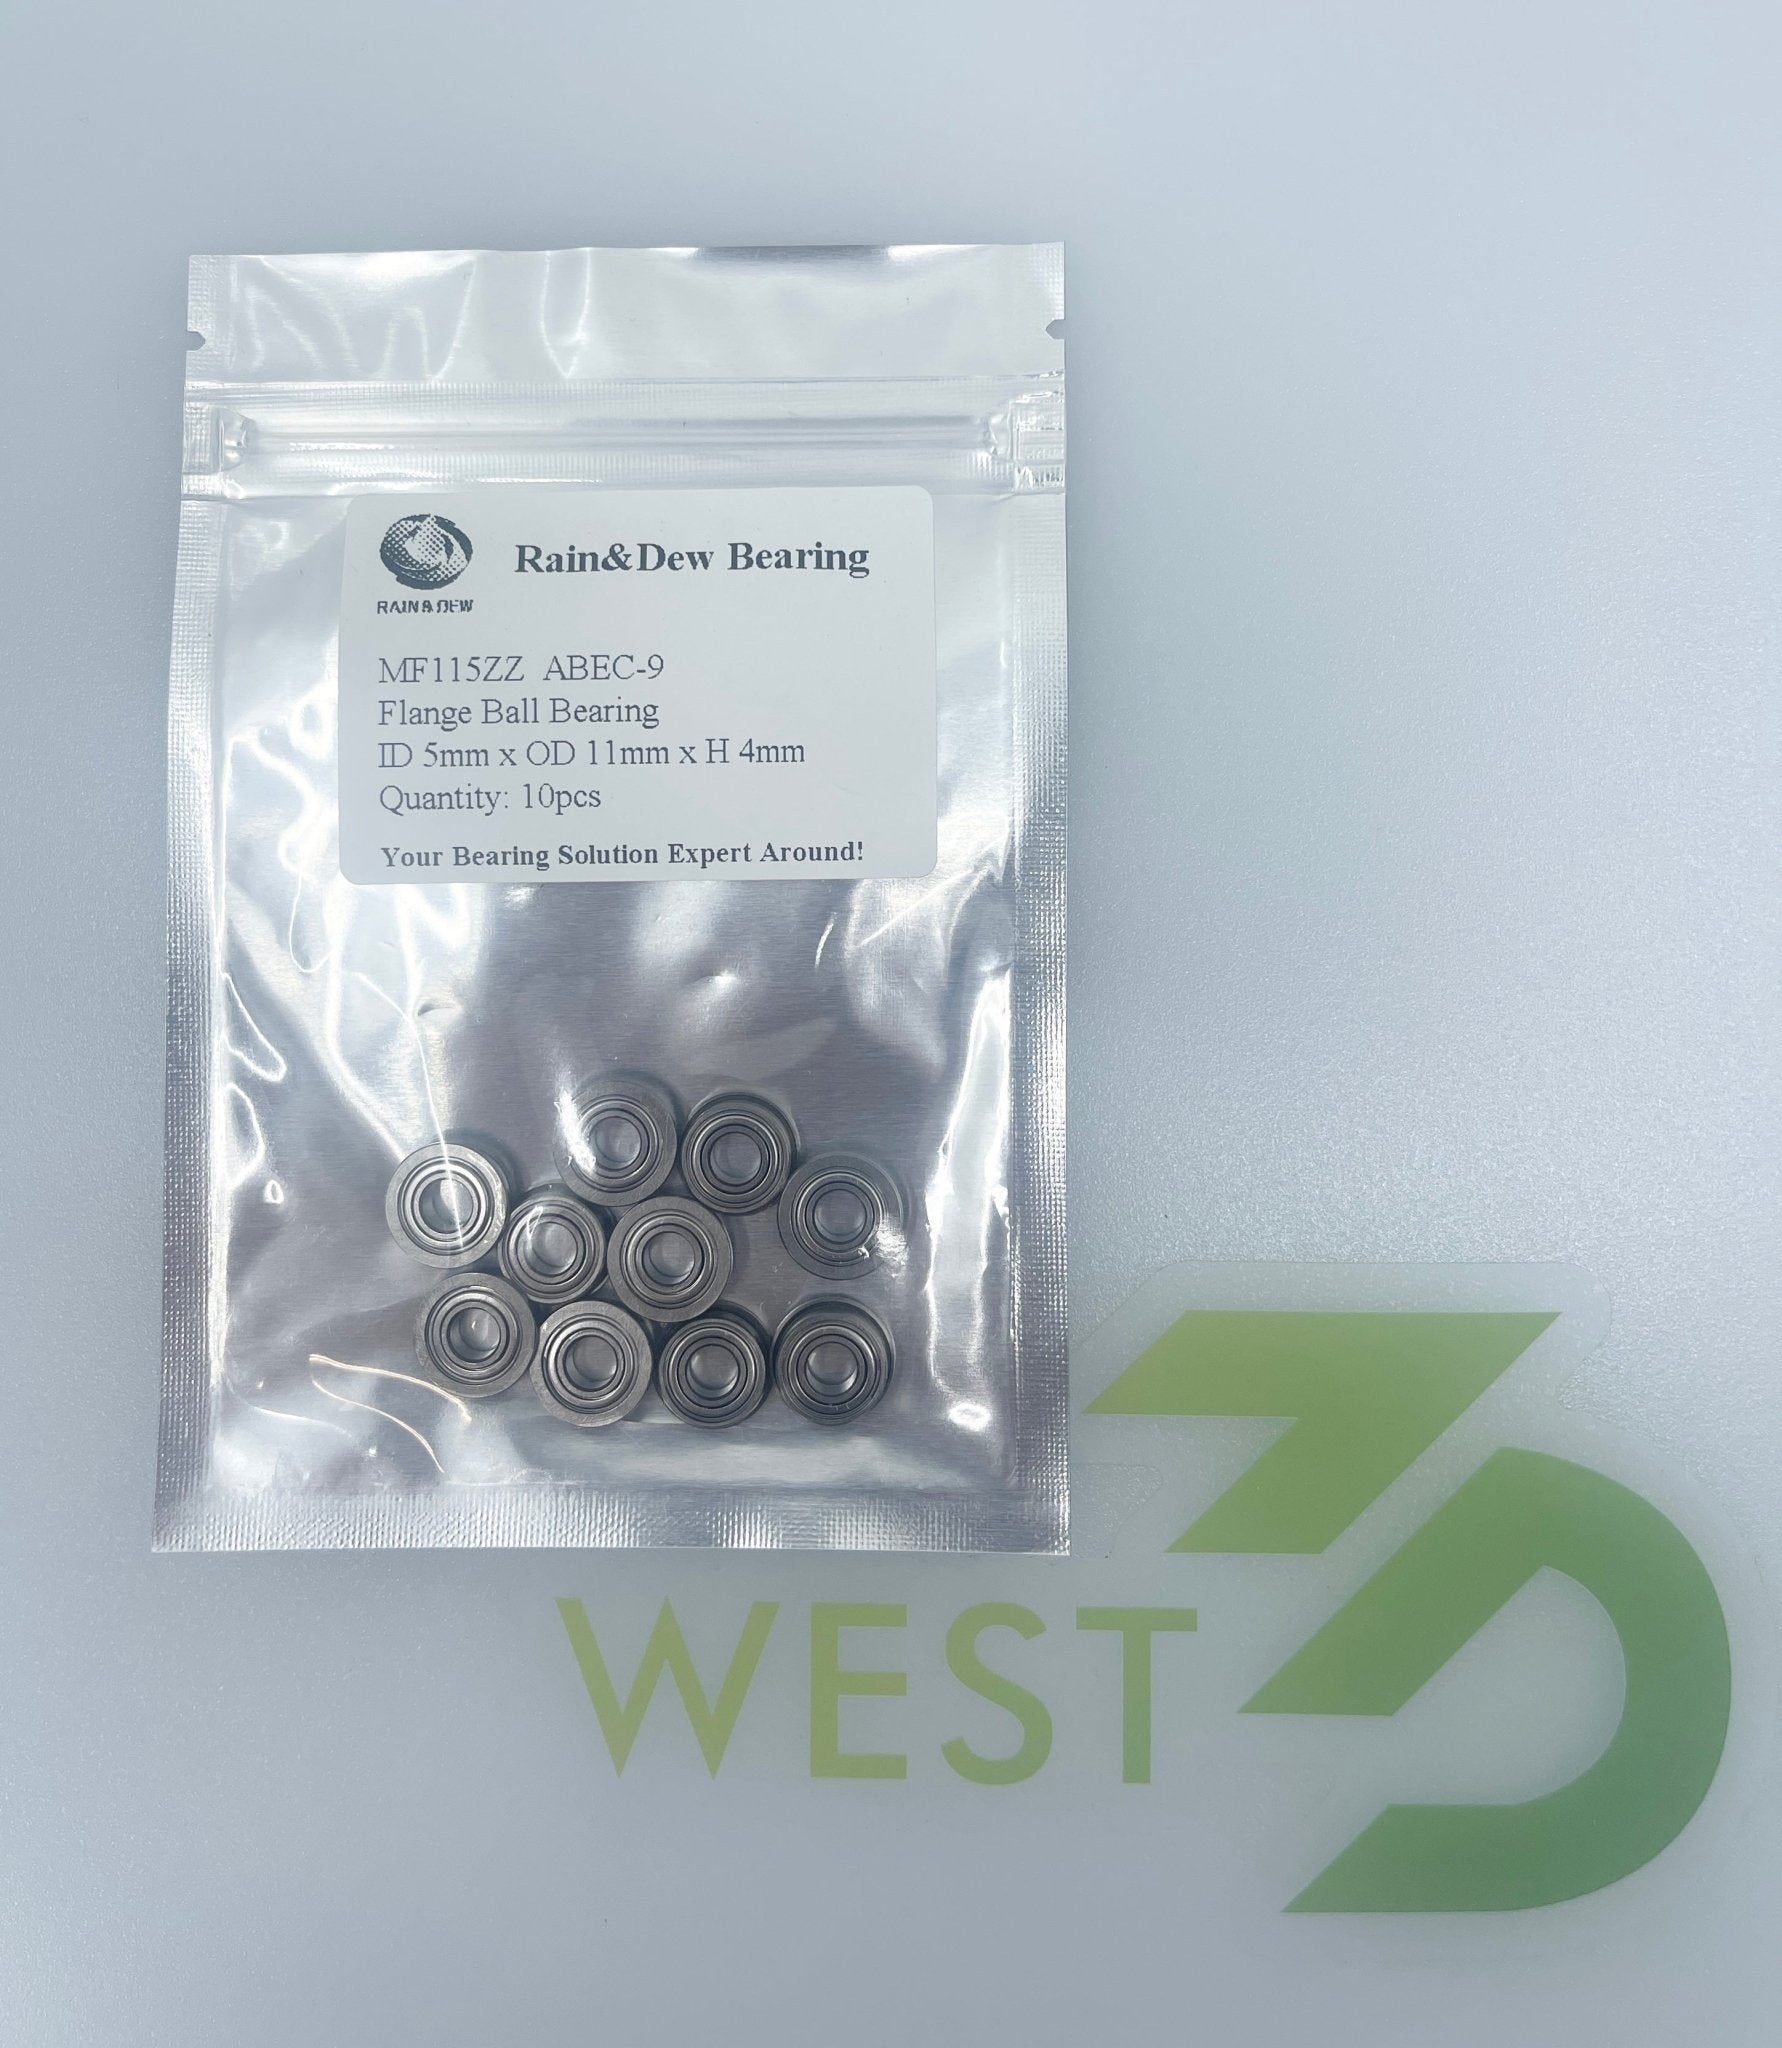 MF115ZZ Flange Ball Bearing - Rain and Dew ABEC9 (self rated) - West3D Printing - Rain&Dew